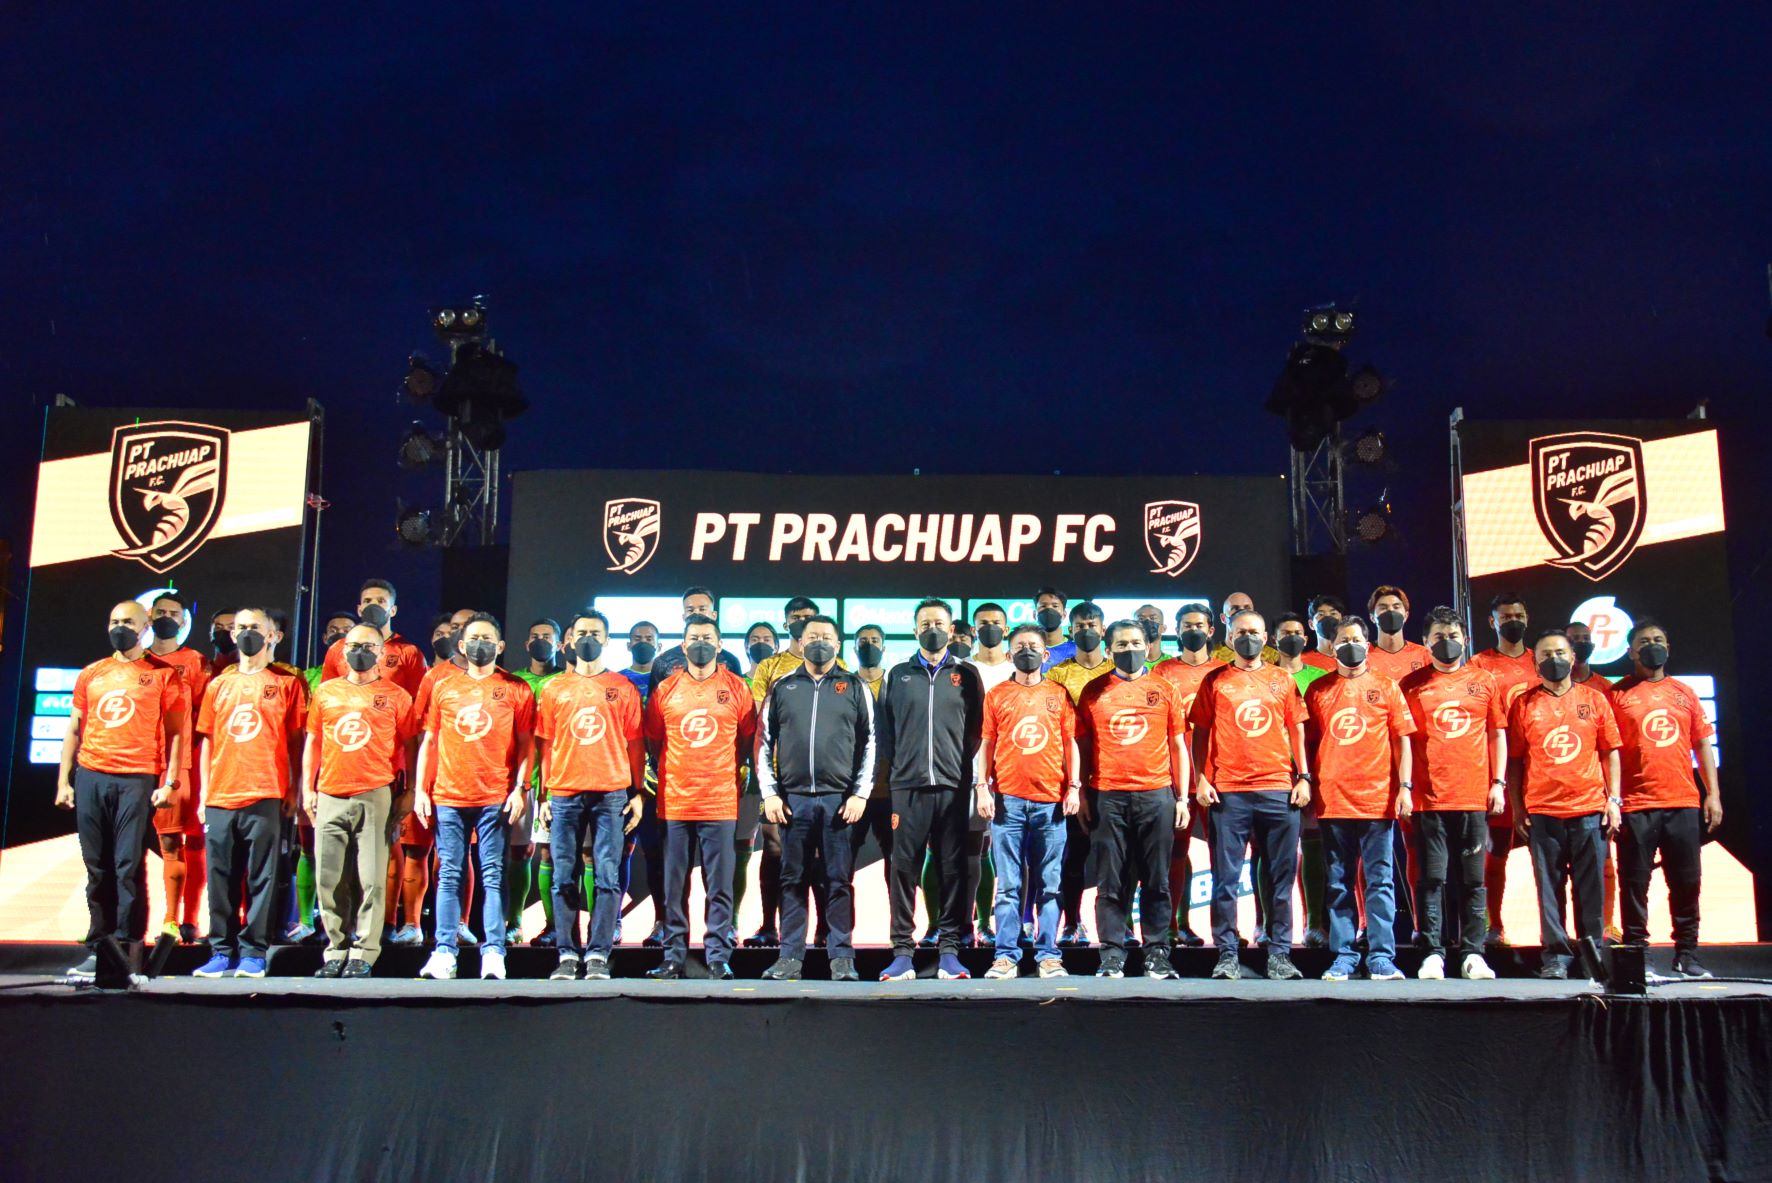 SSI fortified PT Prachuap F.C. Kickoff this year’s Thai league